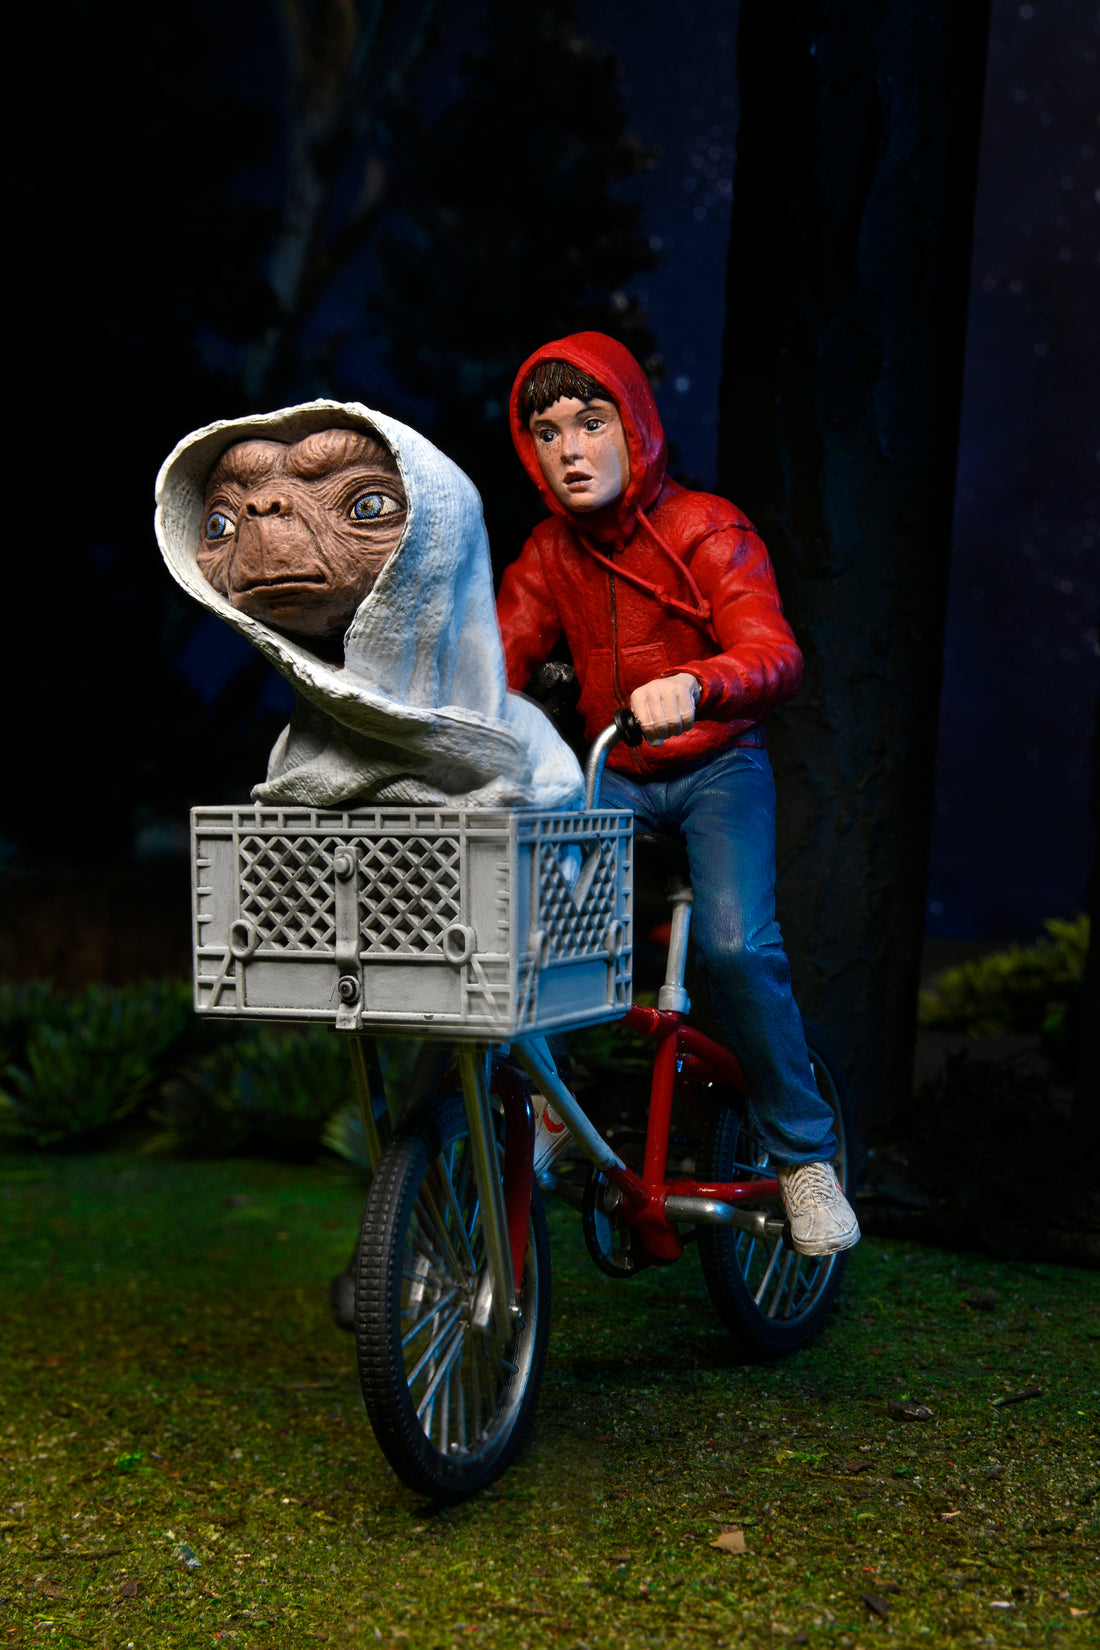 E.T. The Extra-Terrestrial - Elliott &amp; E.T. on Bicycle (40th Anniversary) 7&quot; Scale Action Figure - NECA